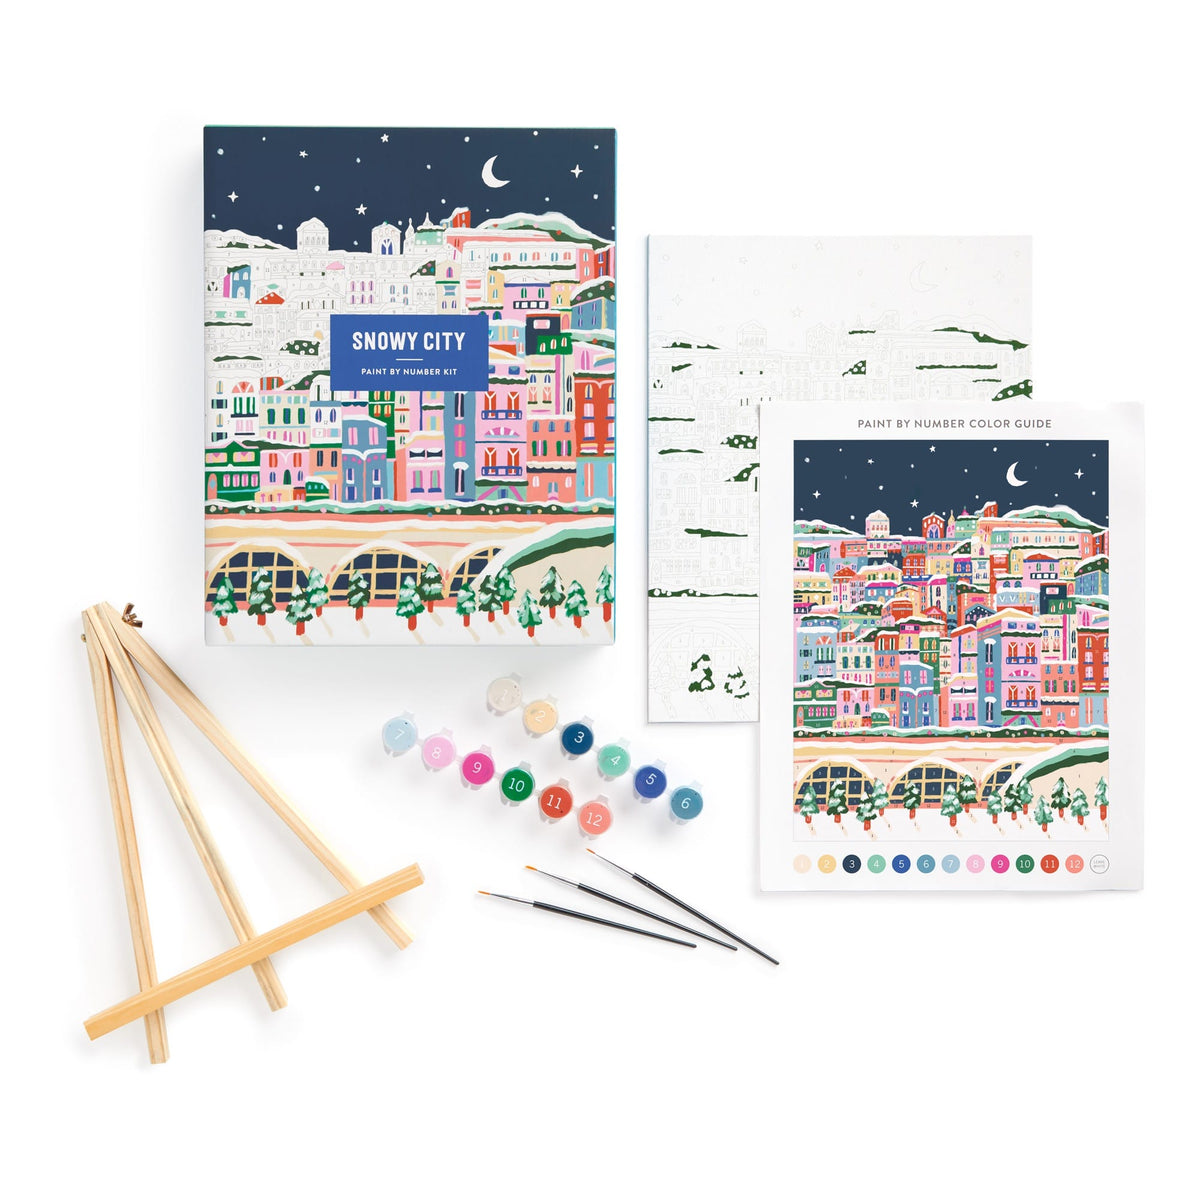 Snowy City 11x14 Paint by Number Kit Paint By Number Kits Millie Putland 